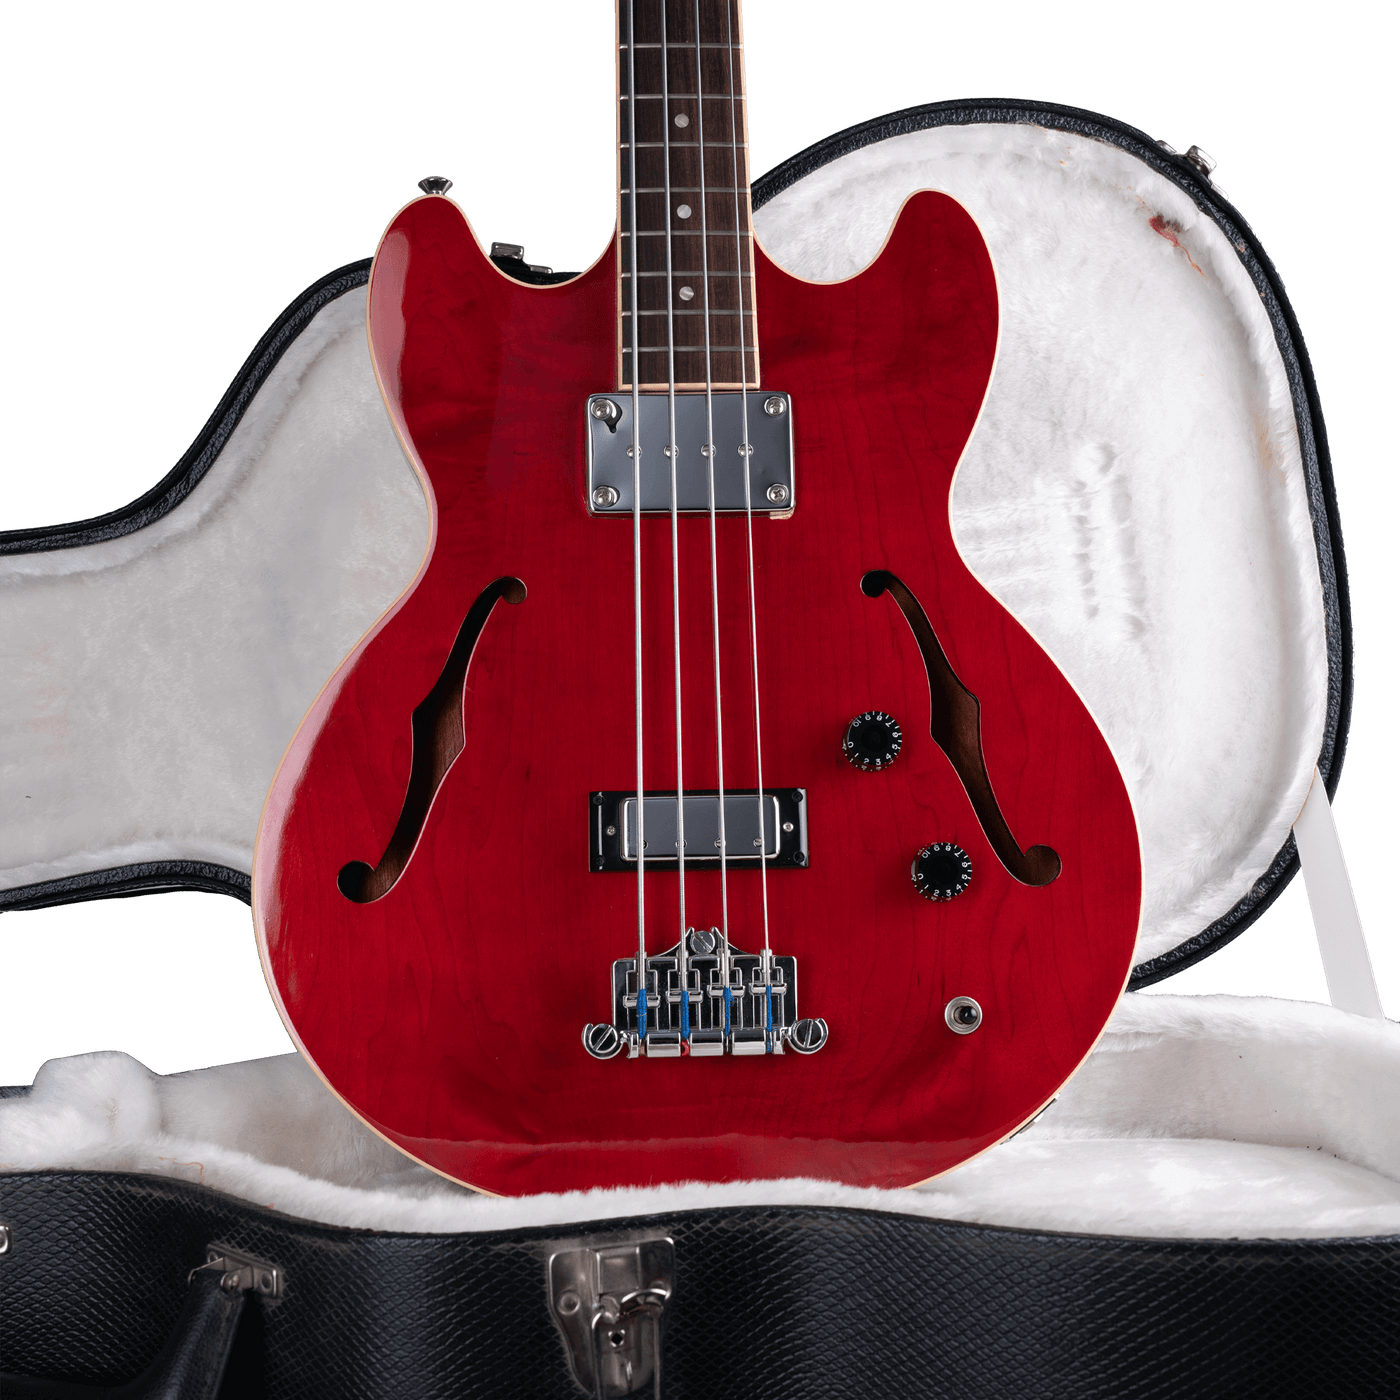 Gibson Midtown Standard Cherry - Looking for a unique bass that is part hollowbody and part solidbody? The Gibson Midtown Bass is the innovative and exciting hybrid you have been looking for. Gibson started with a solid mahogany body, which they chambered